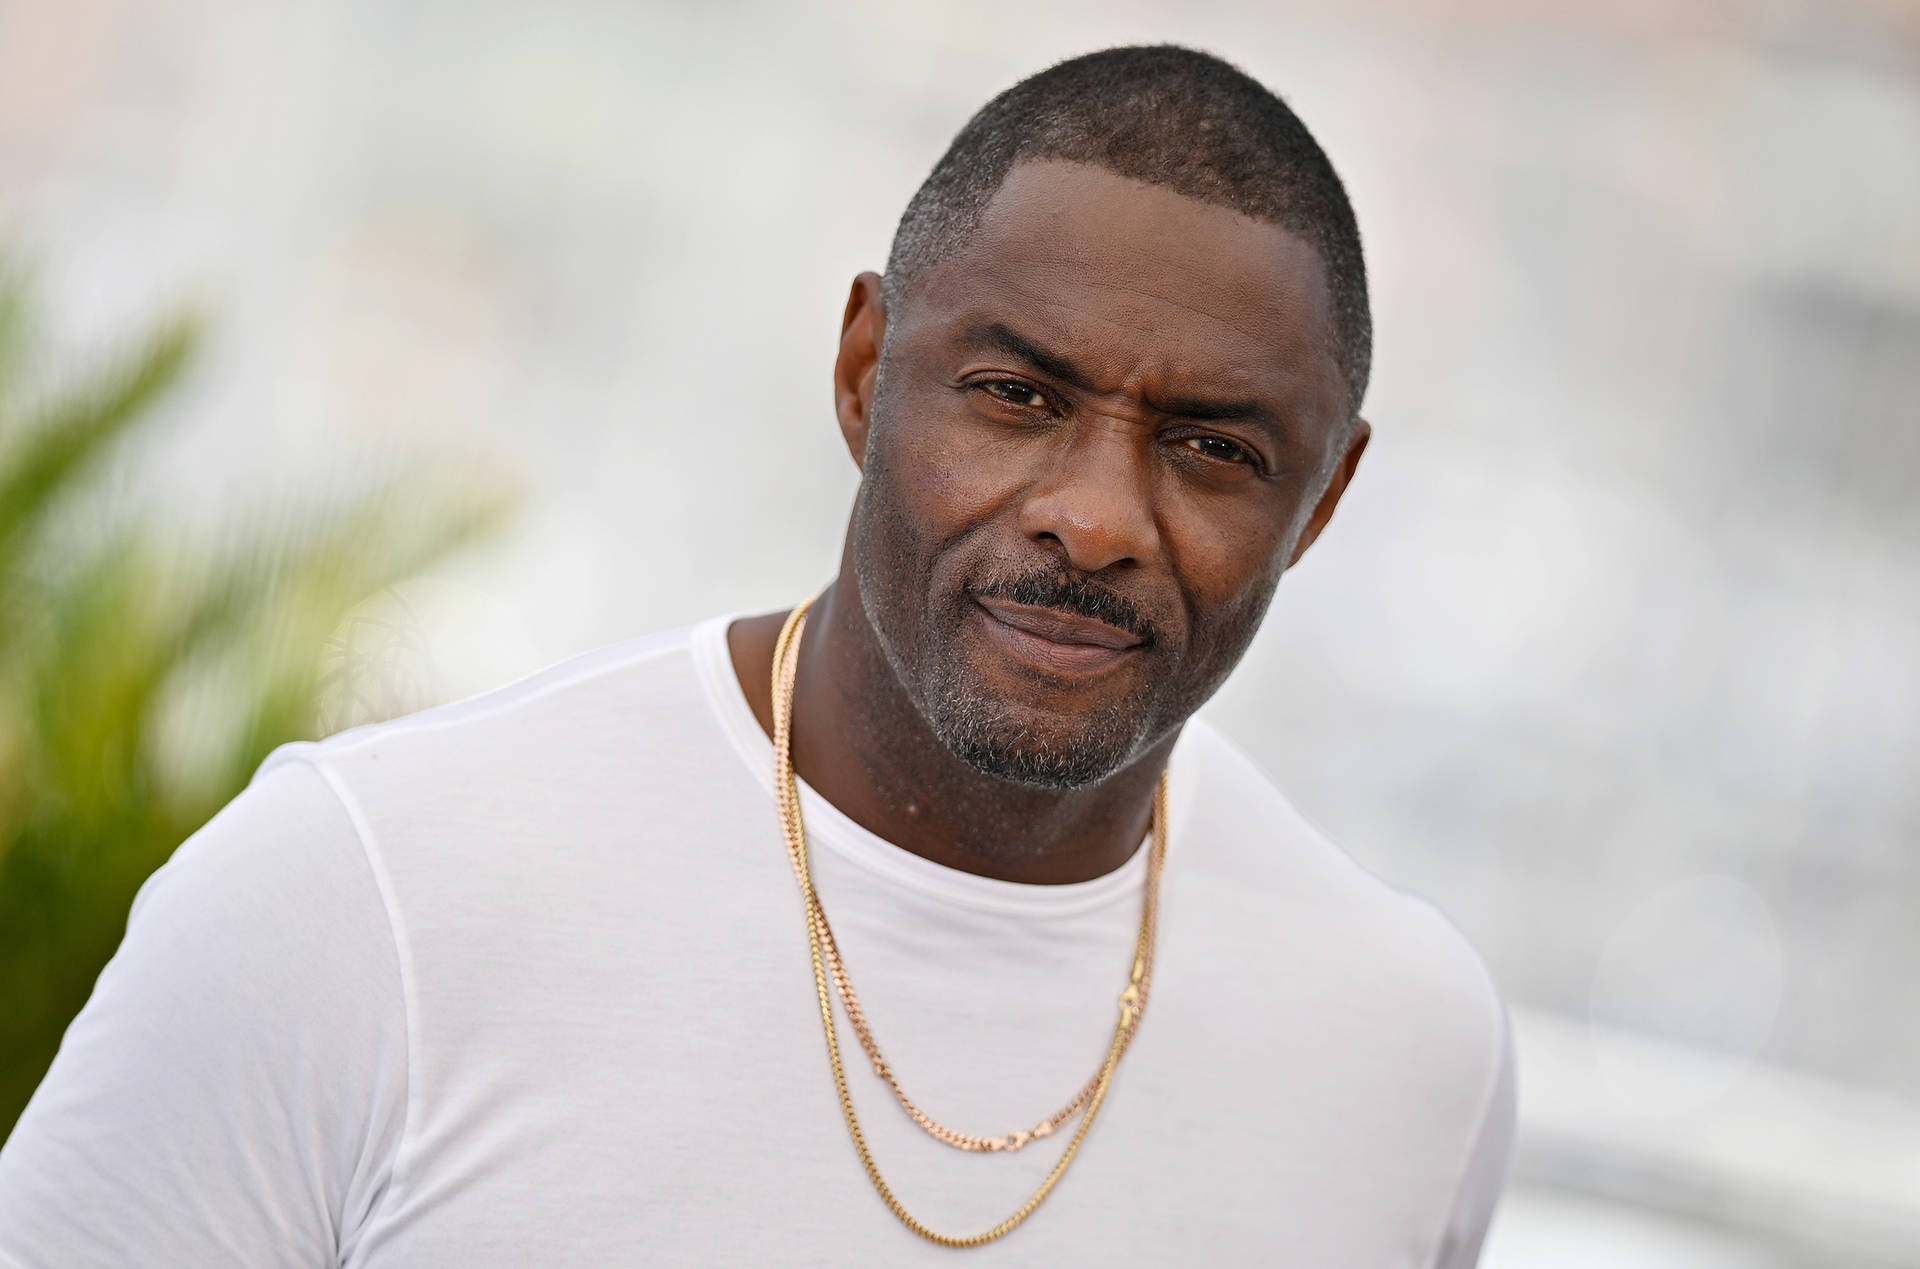 Idris Elba With White Shirt And Gold Necklaces Wallpaper